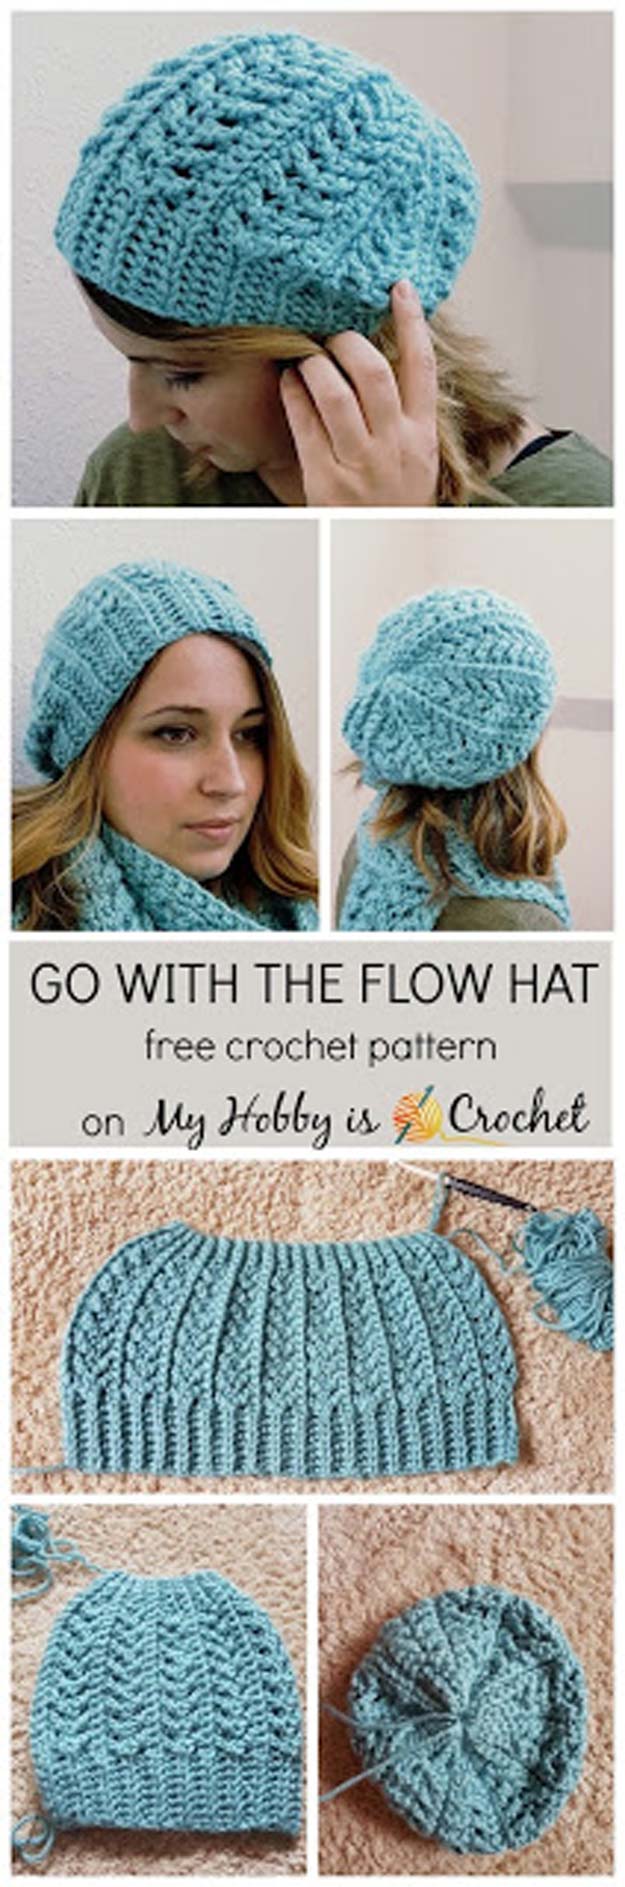 Crochet Patterns and Projects for Teens - Go with the Flow Hat - Best Free Patterns and Tutorials for Crocheting Cute DIY Gifts, Room Decor and Accessories - How To for Beginners - Learn How To Make a Headband, Scarf, Hat, Animals and Clothes DIY Projects and Crafts for Teenagers #crochet #crafts #teencrafts #freecrochet #crochetpatterns